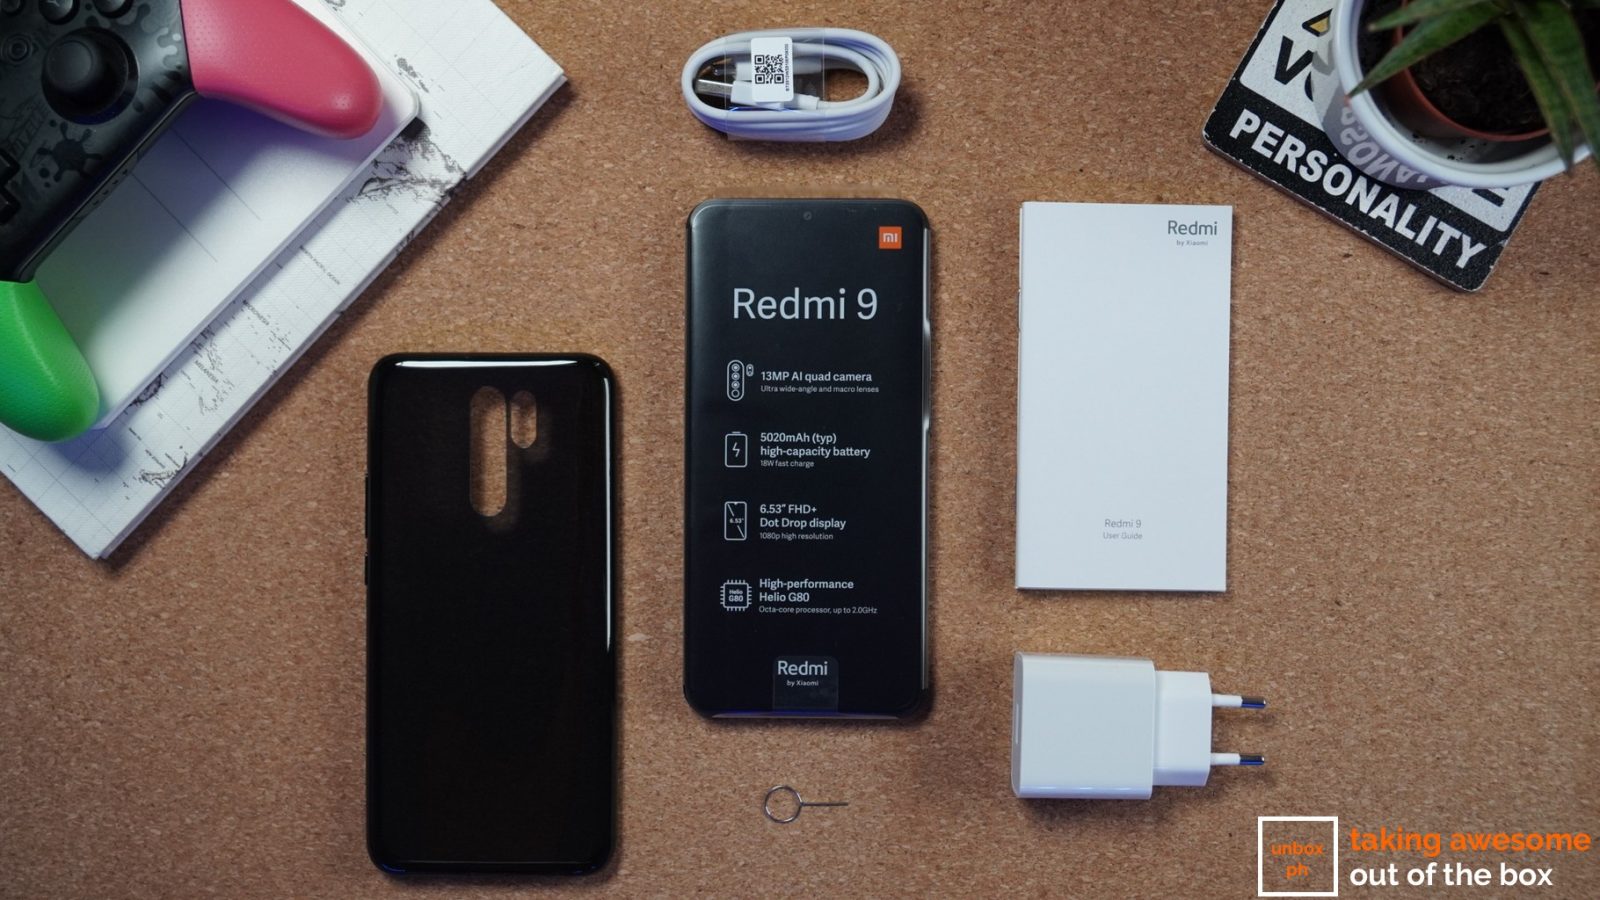 Contents of Redmi 9's packaging